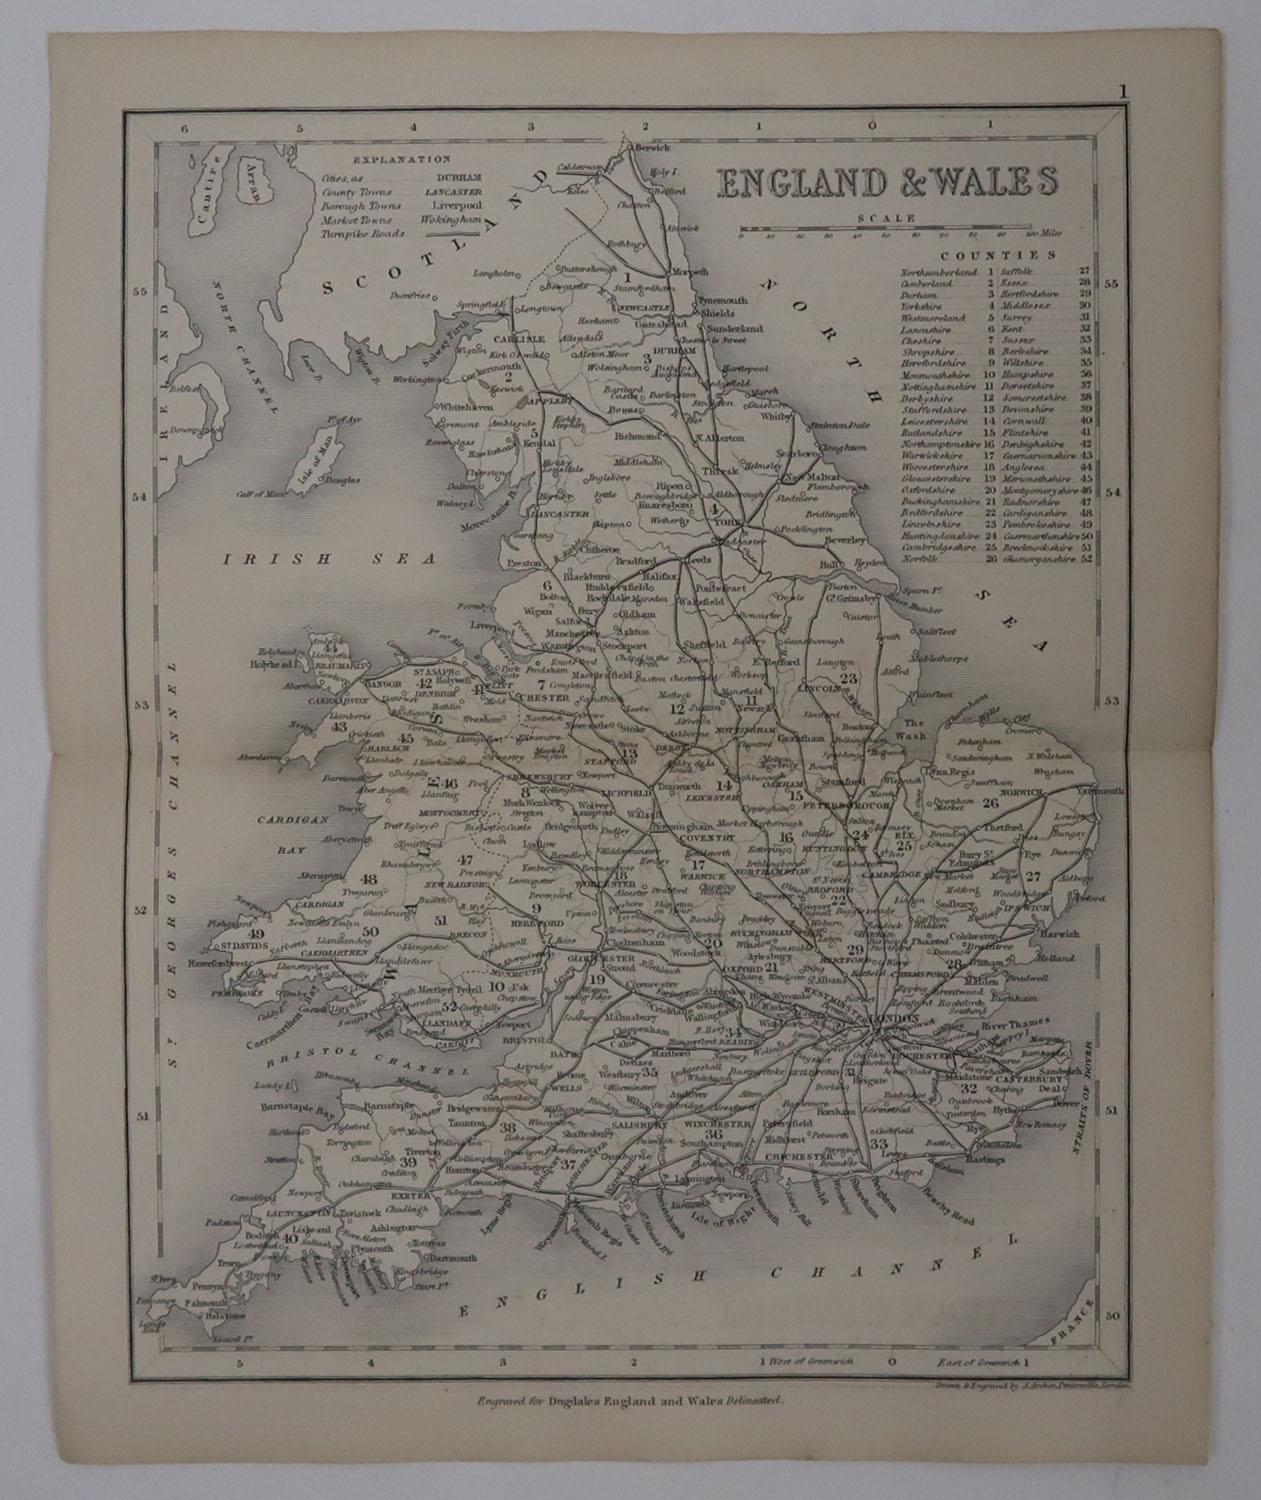 English Original Antique Map of England and Wales by J.Archer, circa 1840